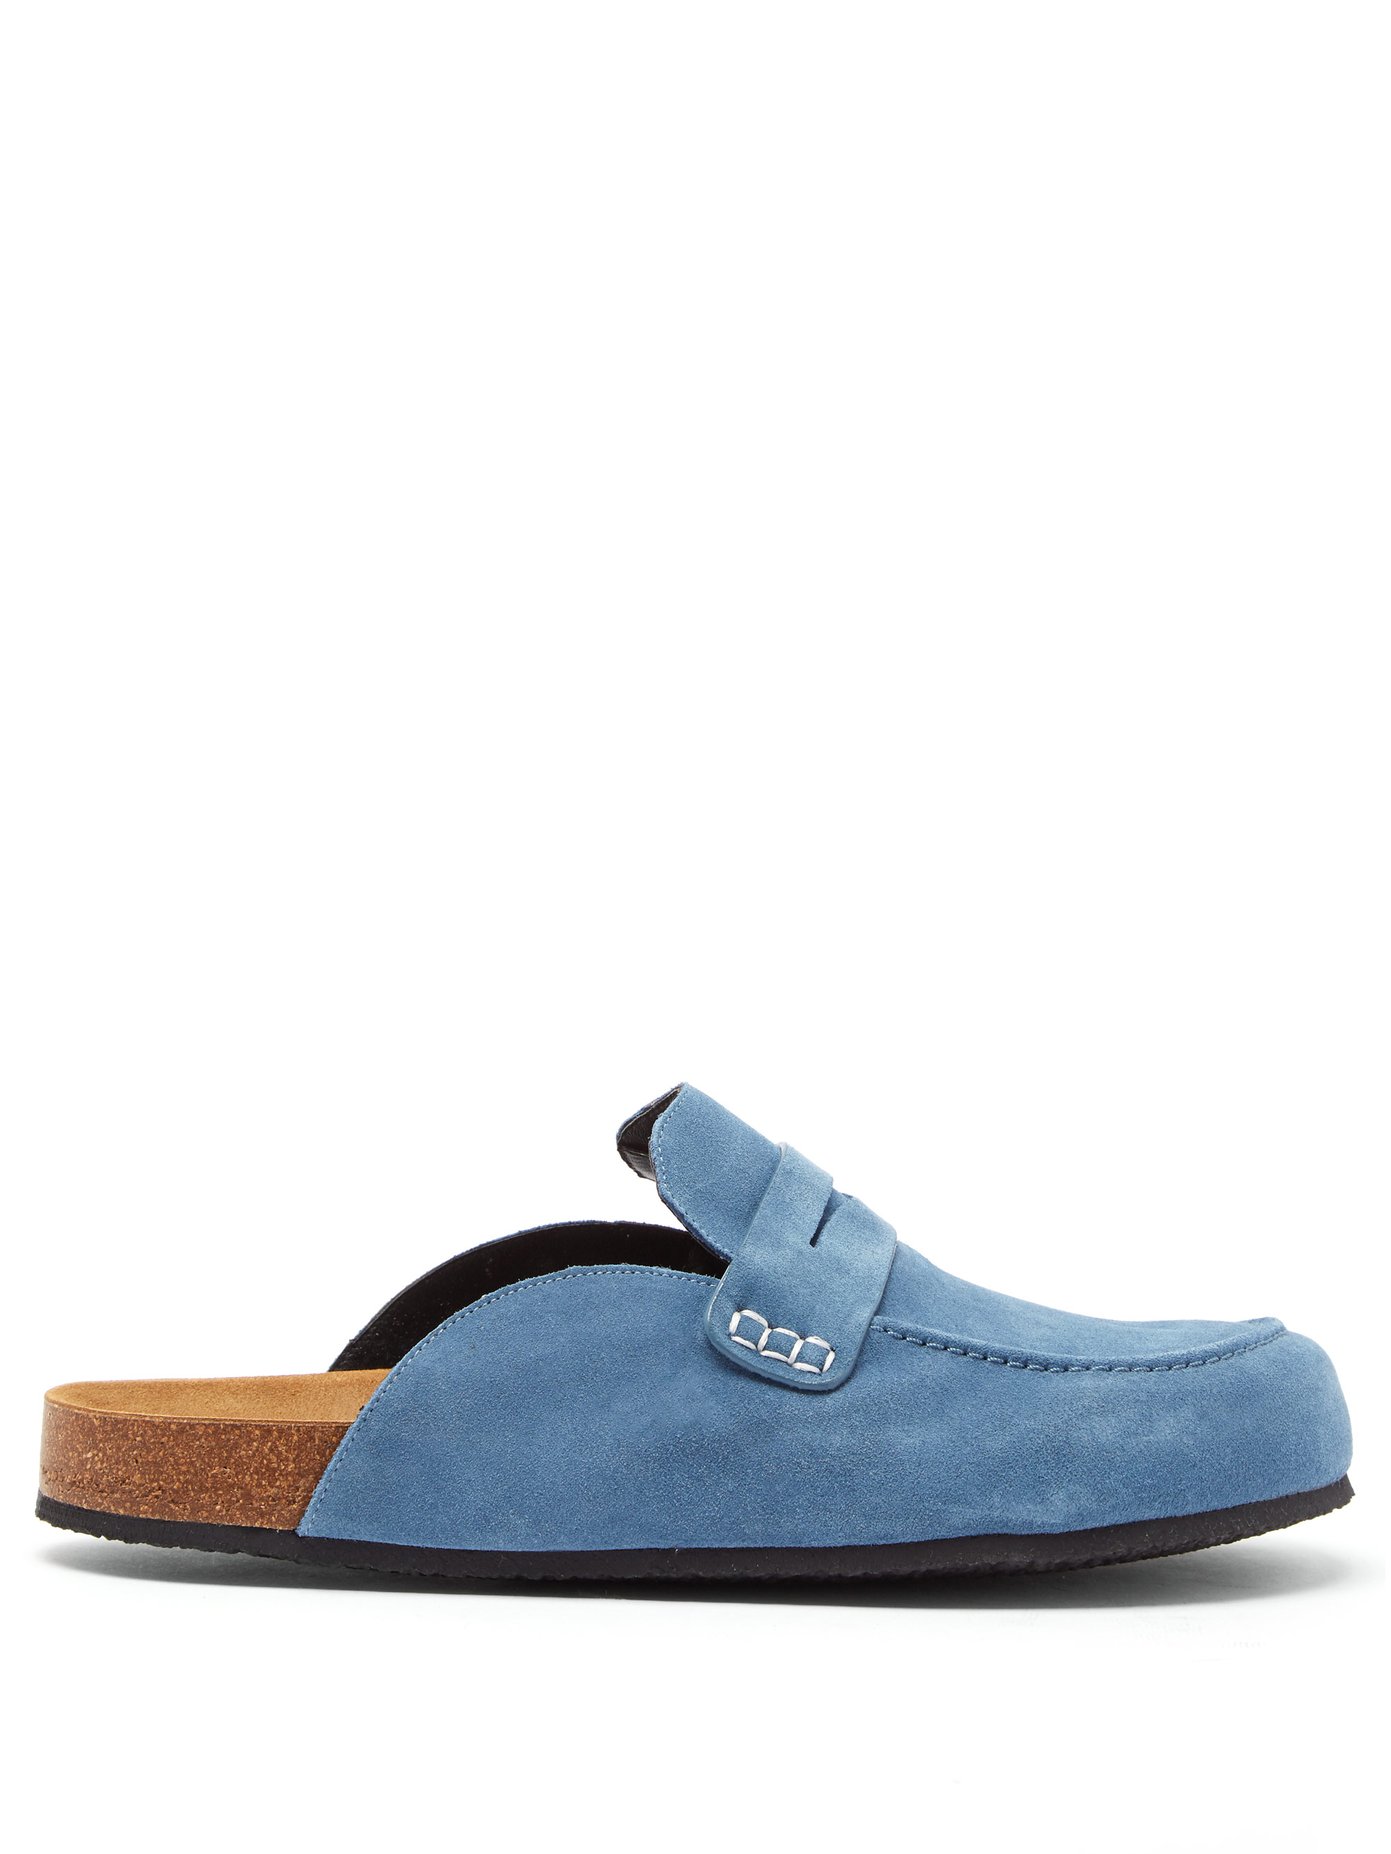 Backless suede penny loafers | JW 